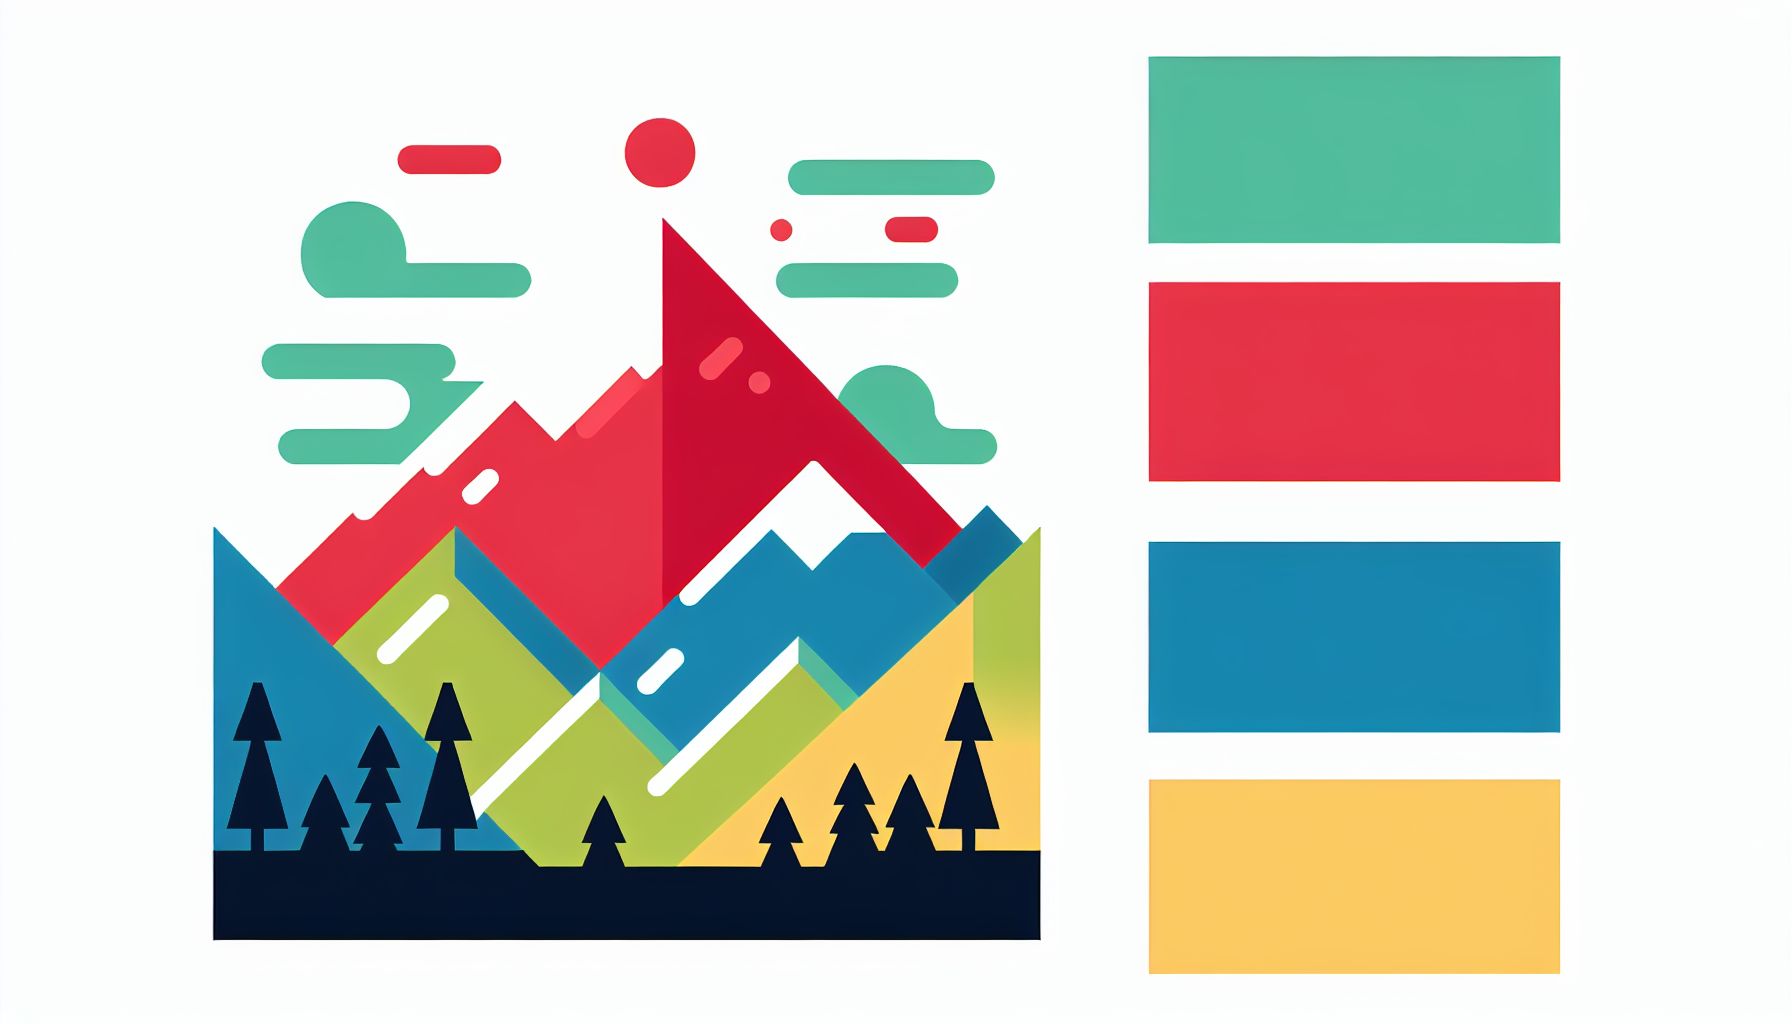 Summit in flat illustration style and white background, red #f47574, green #88c7a8, yellow #fcc44b, and blue #645bc8 colors.